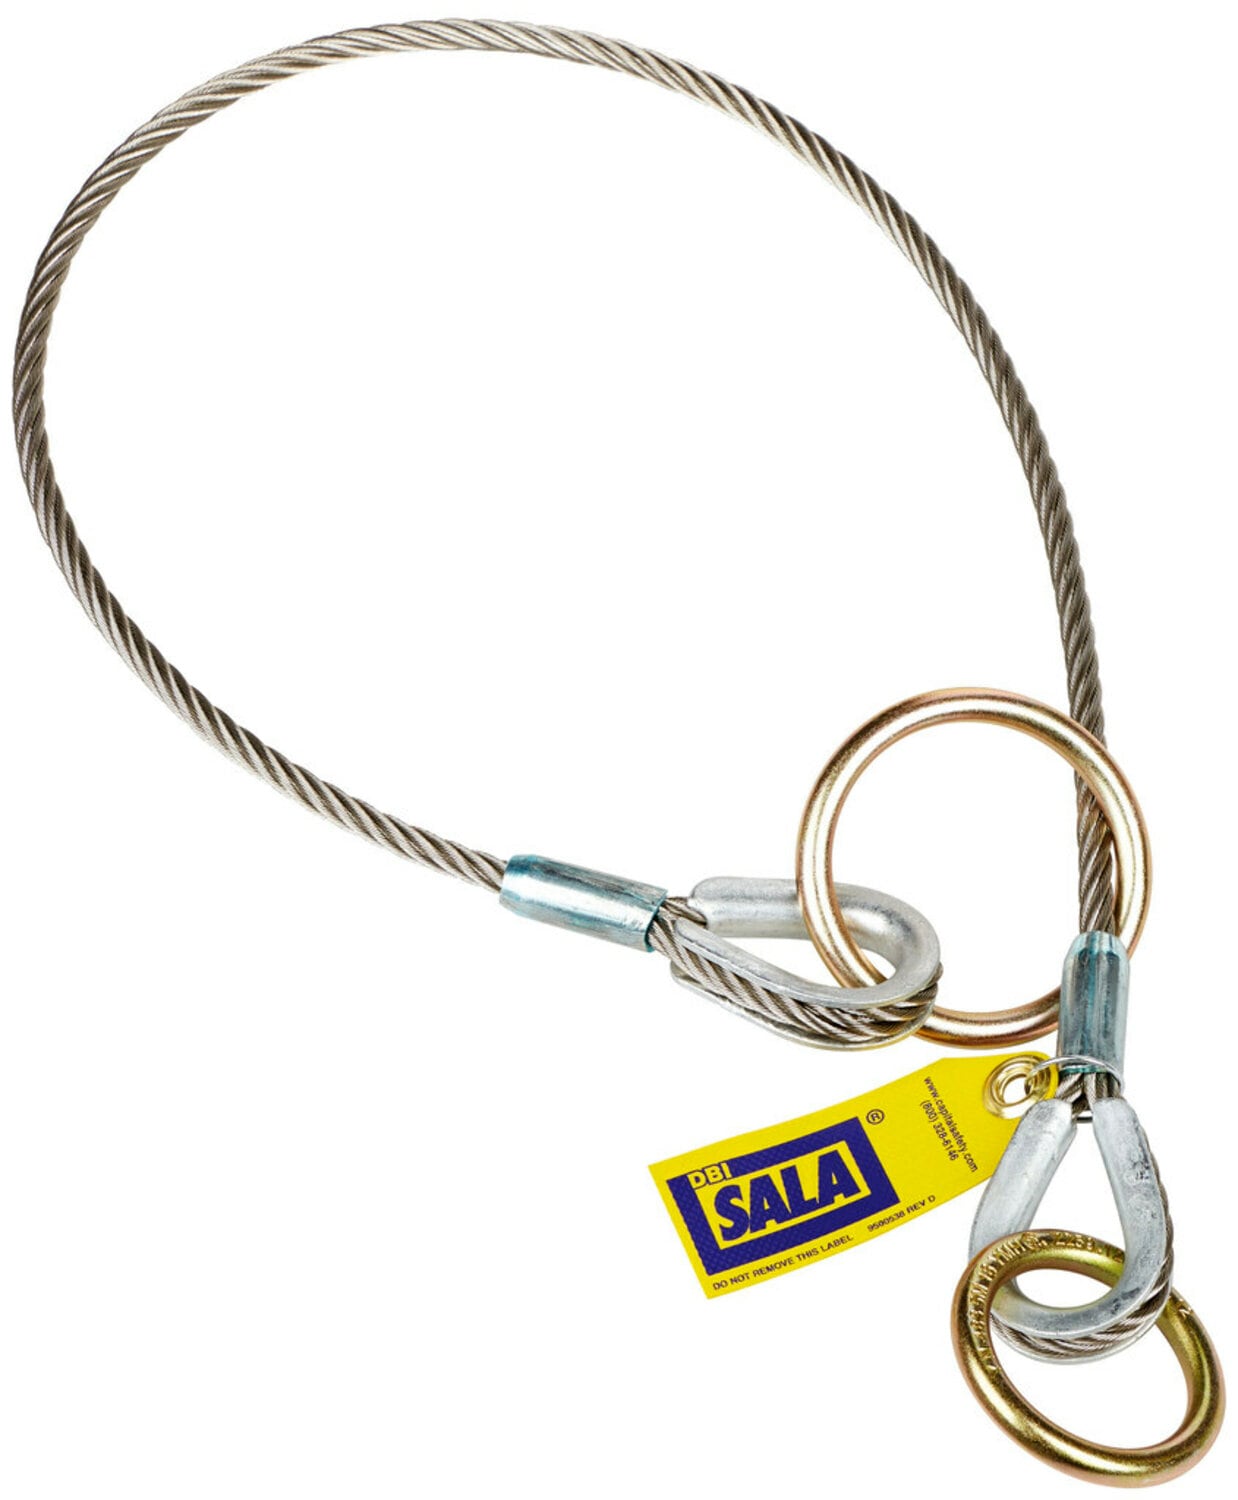 7100231778 - 3M DBI-SALA Pass-Thru Cable Tie-Off Adapter Anchor 5900552, Stainless
Steel, 10 ft